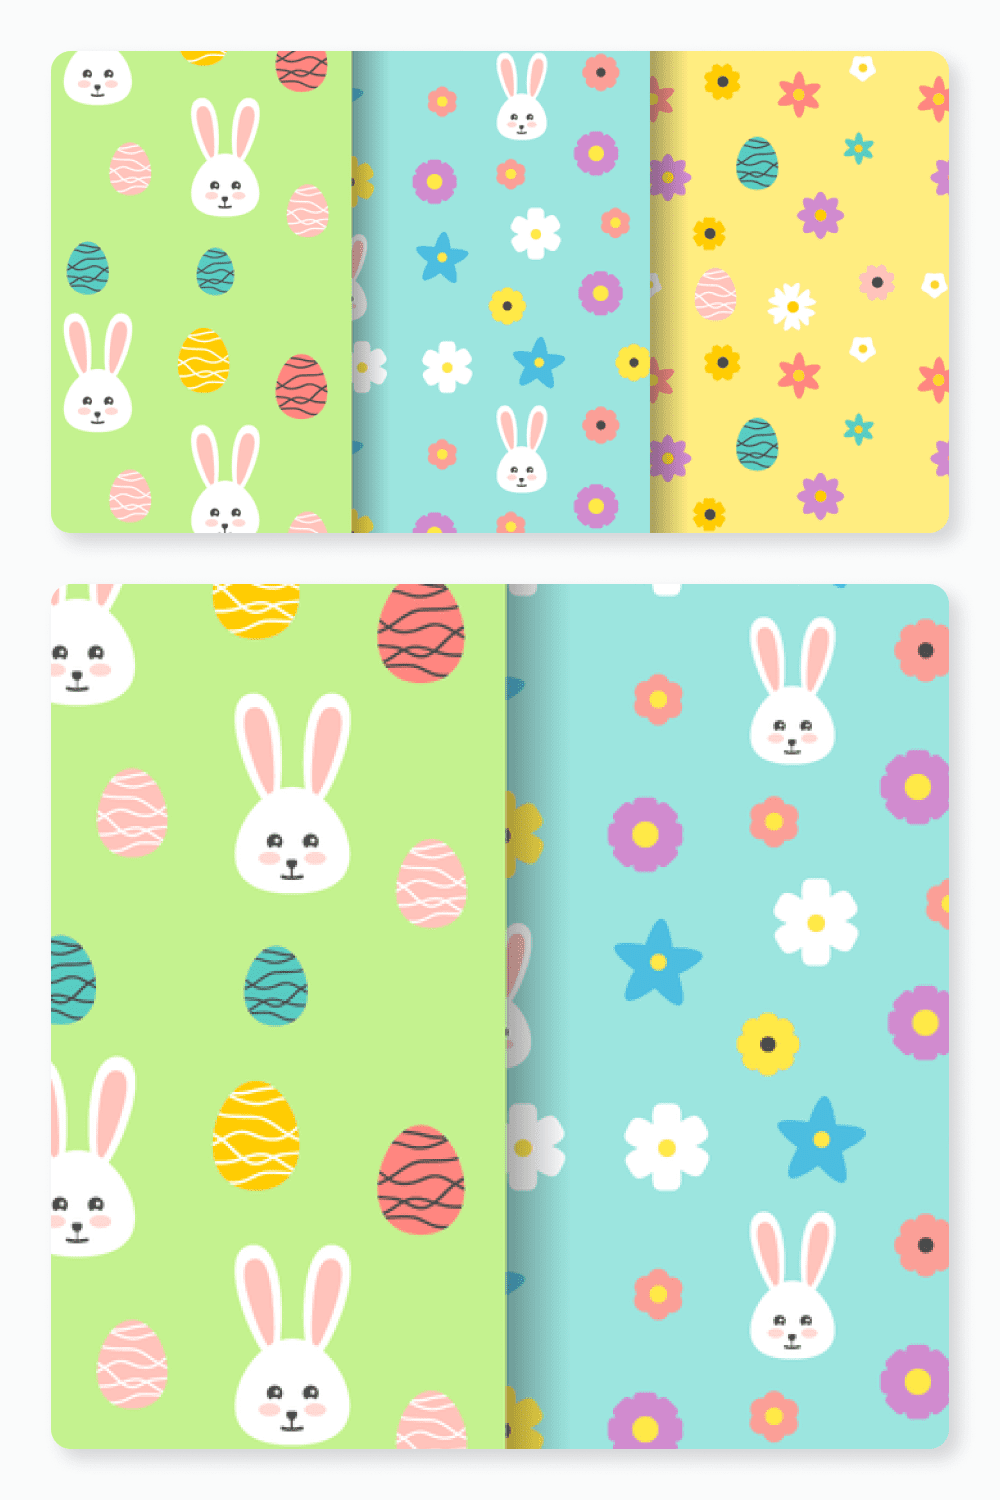 Collage of patterns with the image of the face of a rabbit, eggs and flowers.